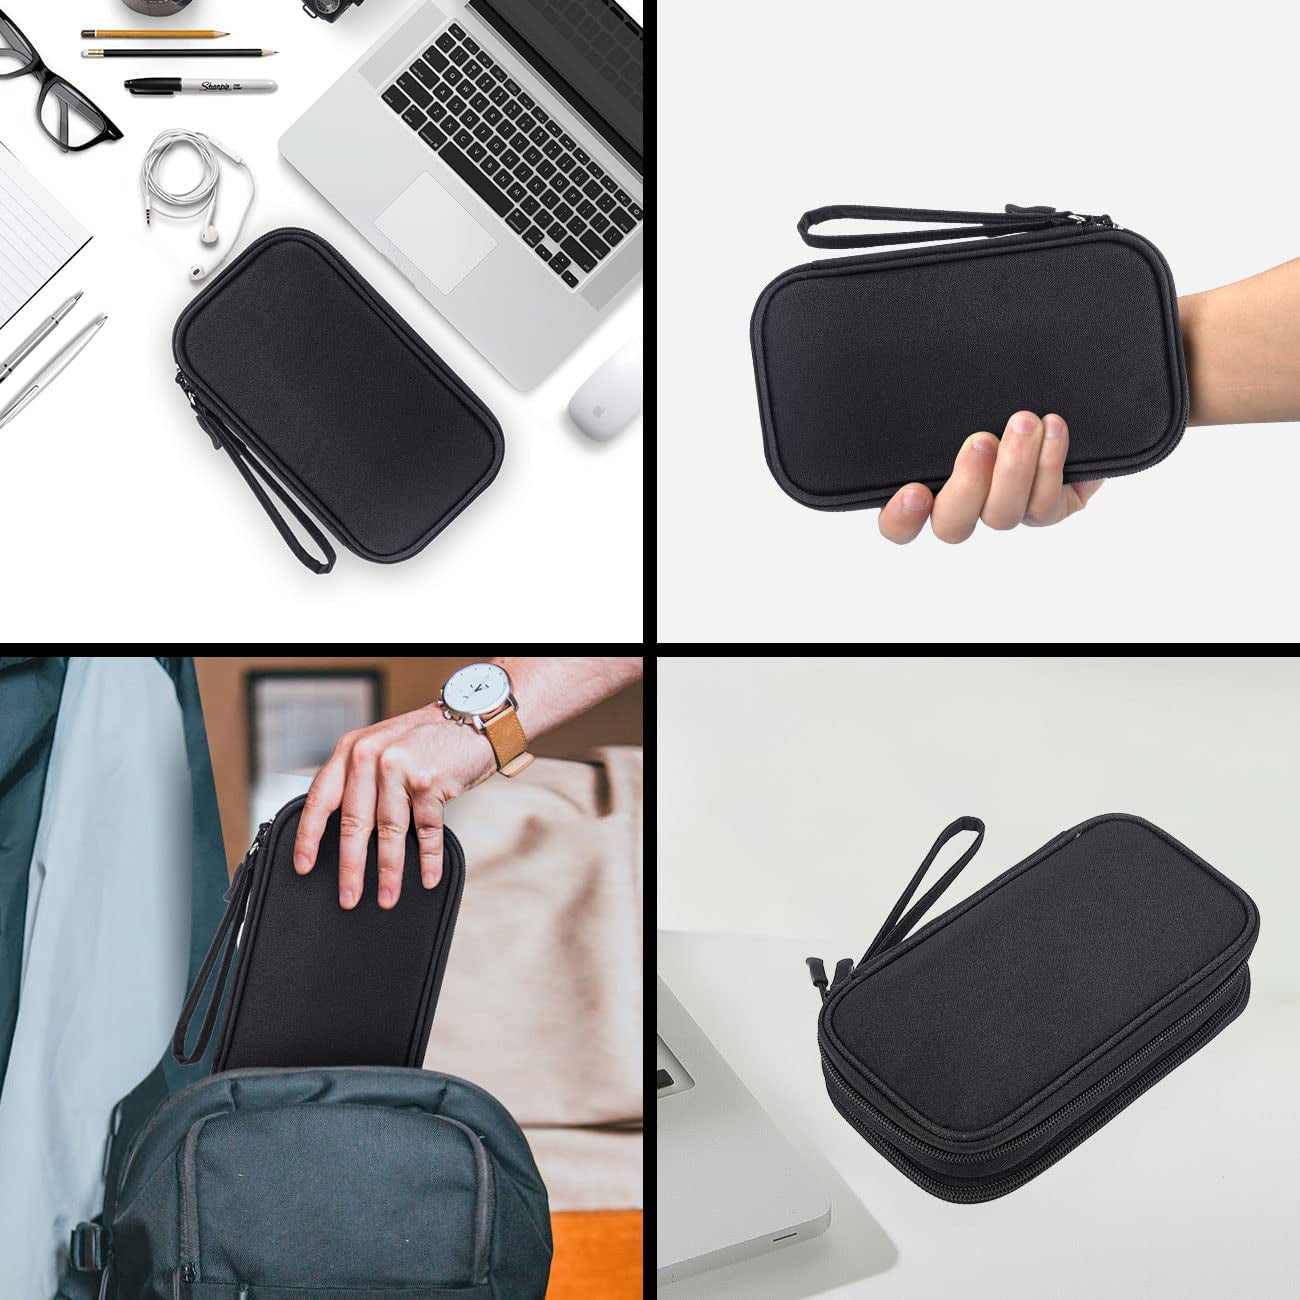 Electronics Accessories Organizer Pouch Bag, Travel Universal Organizer for Cable, Charger, Phone, SD Card, Business Travel Gadget Bag